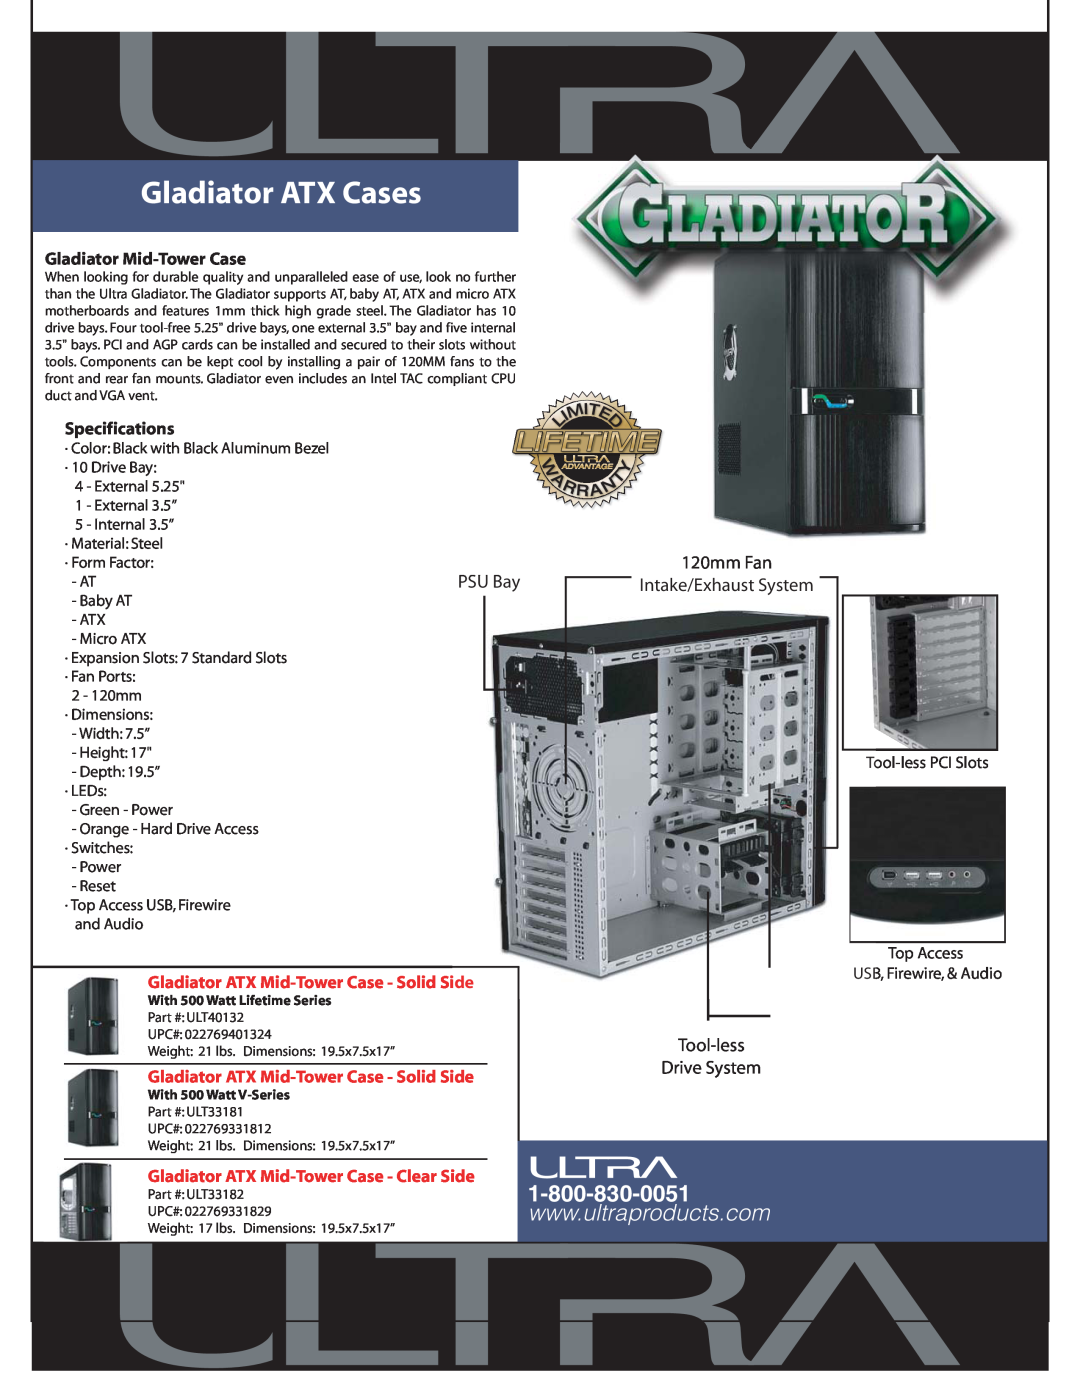 Ultra Products specifications Gladiator ATX Cases, 120mm Fan Intake/Exhaust System Tool-less Drive System 